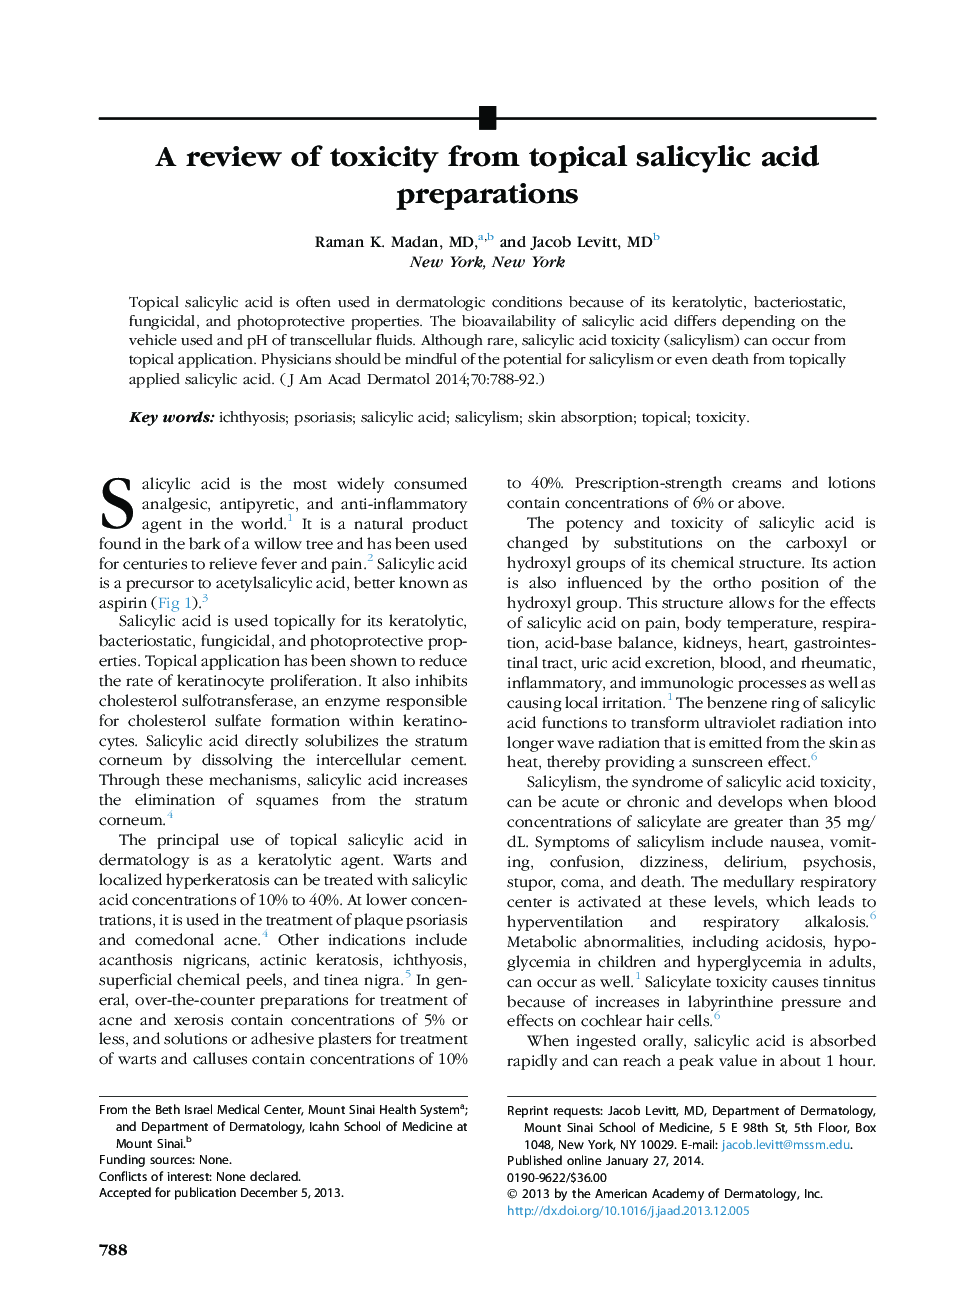 ReviewA review of toxicity from topical salicylic acid preparations